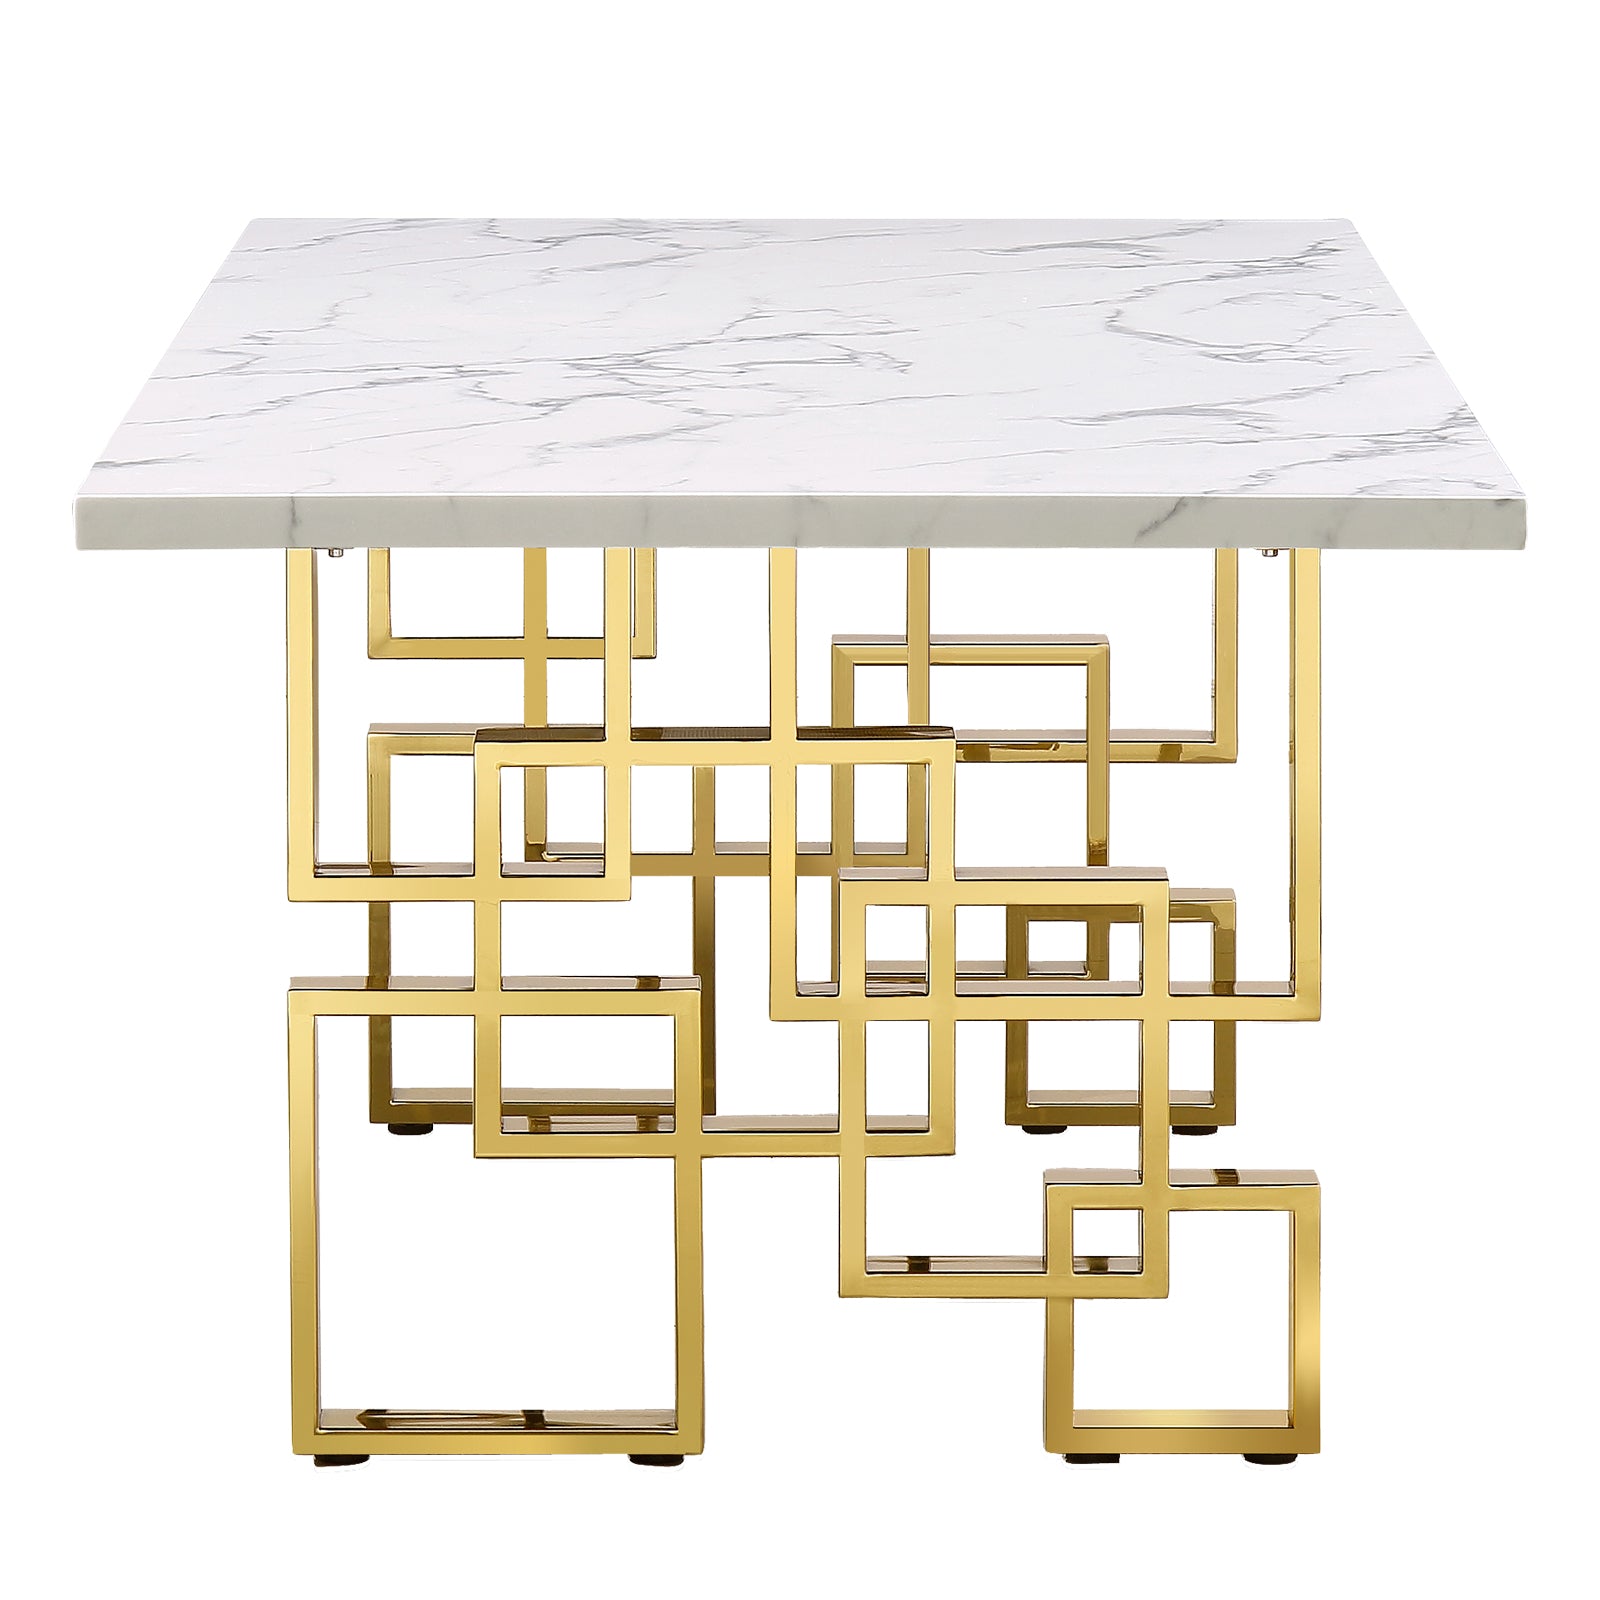 717 Set | AUZ White and Gold Dining room Sets for 6